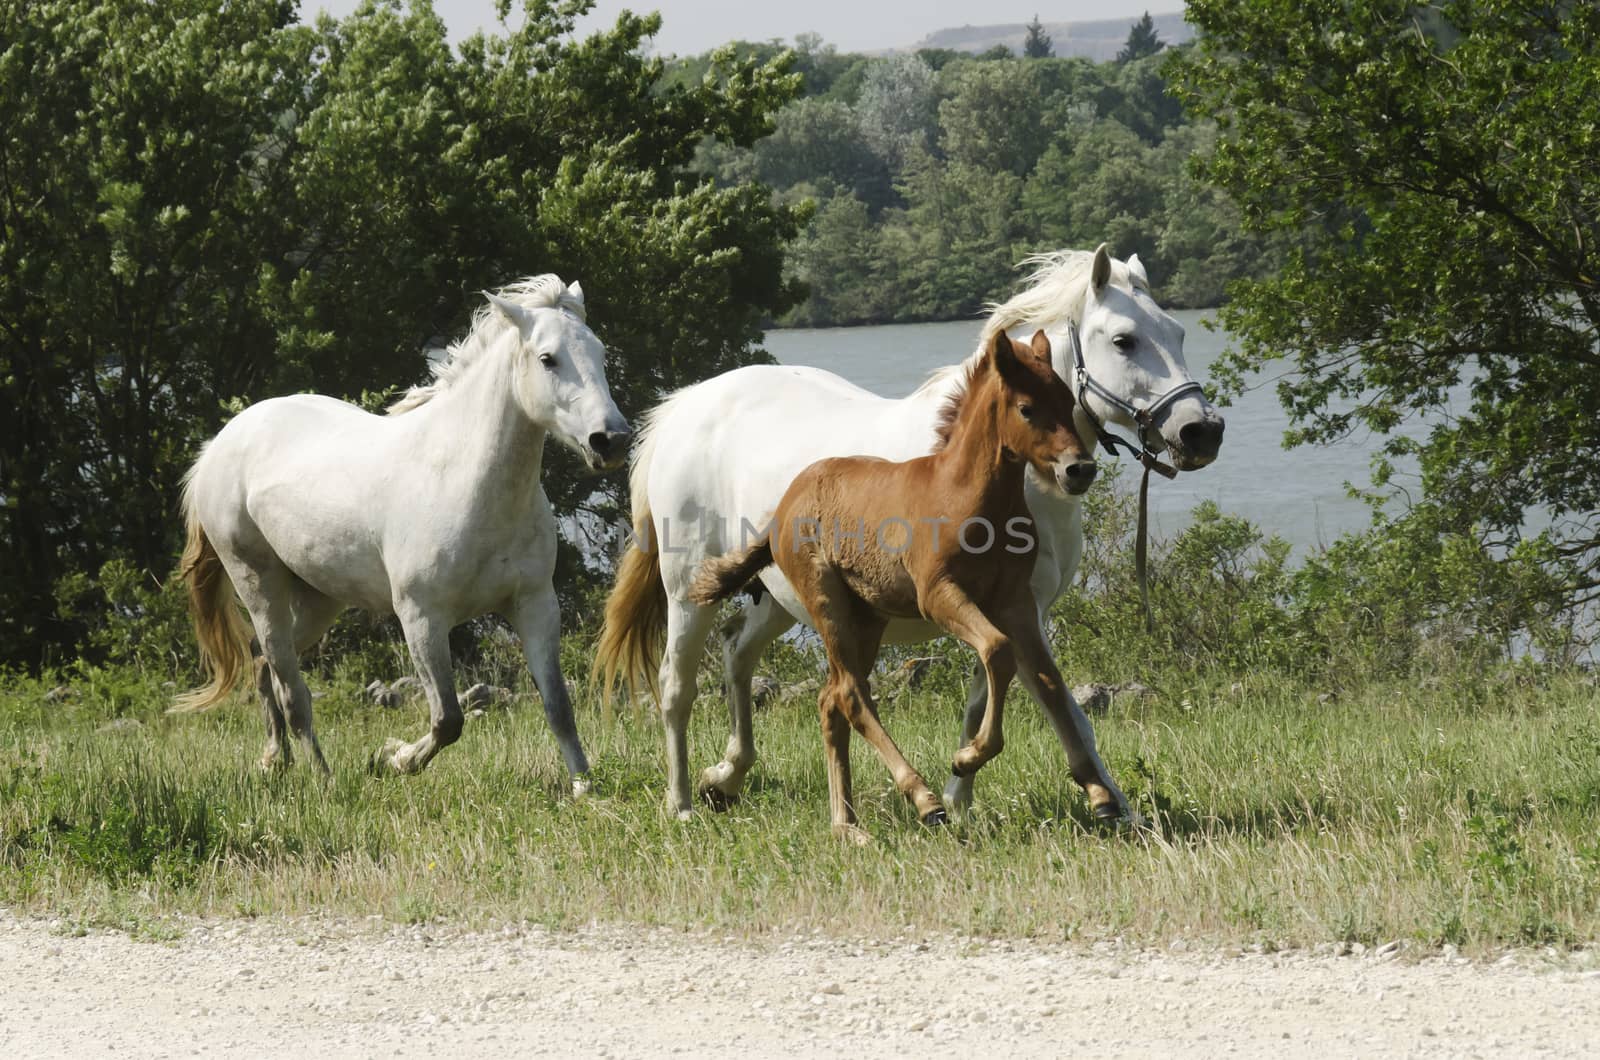 horses and a foal galloping in the campaign